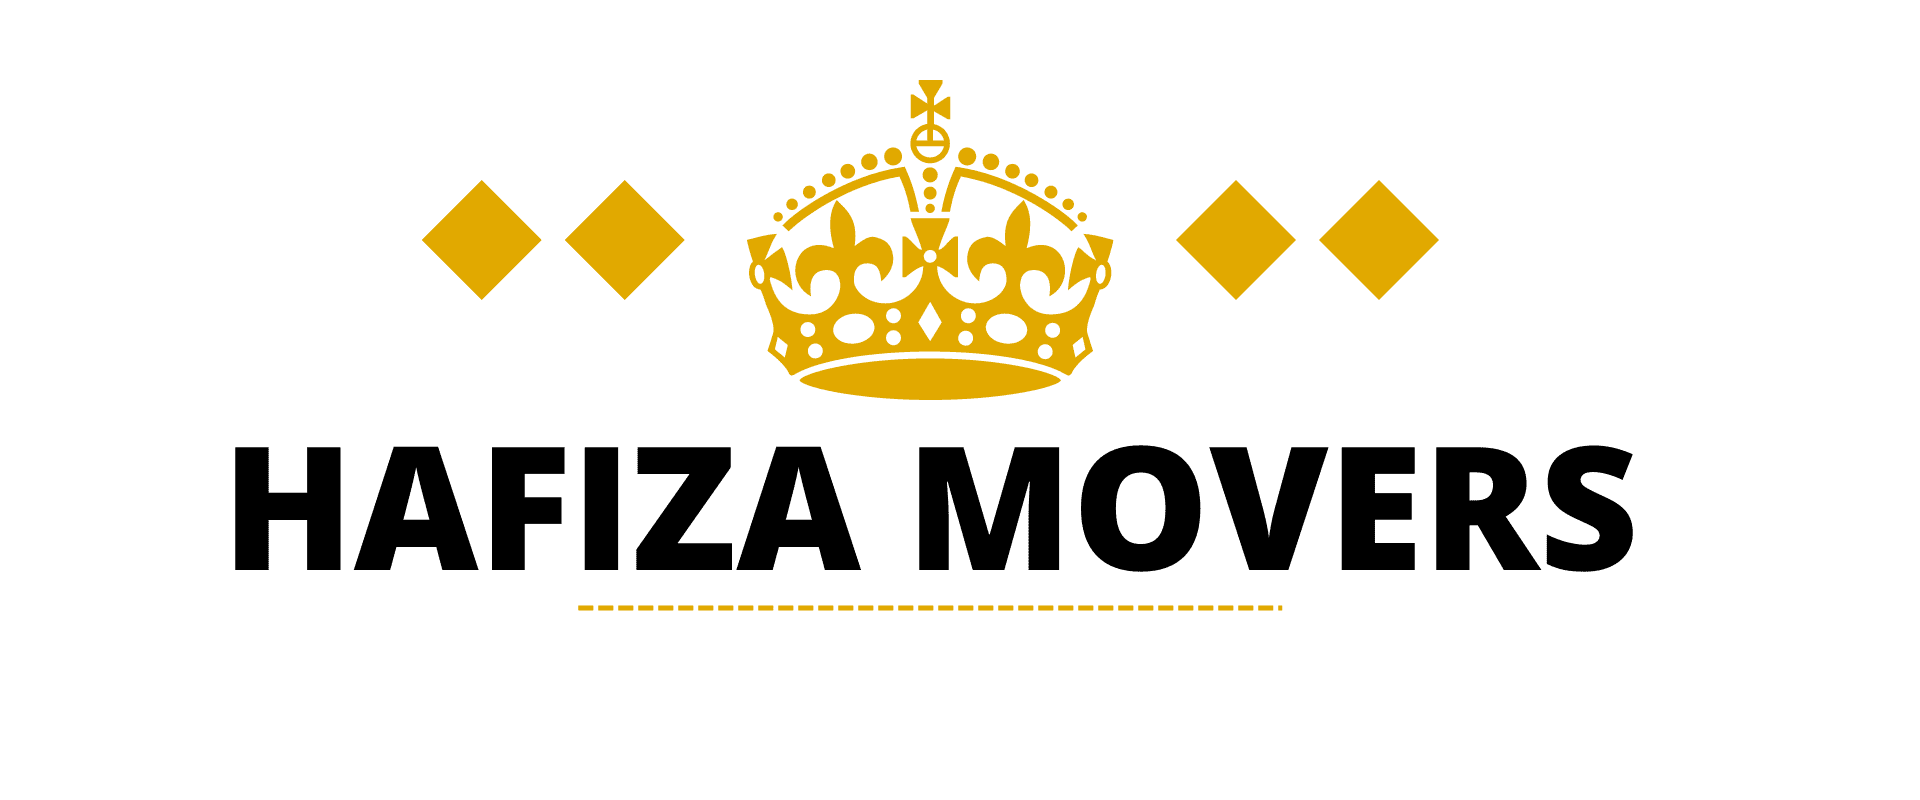 Hafiza Movers, Local moving companies melbourne, Cheap removalist,  Removalist near me, Furniture removalist, Man with a truck, Cheapest removalist in melbourne, Movers near me Men with 2 truck